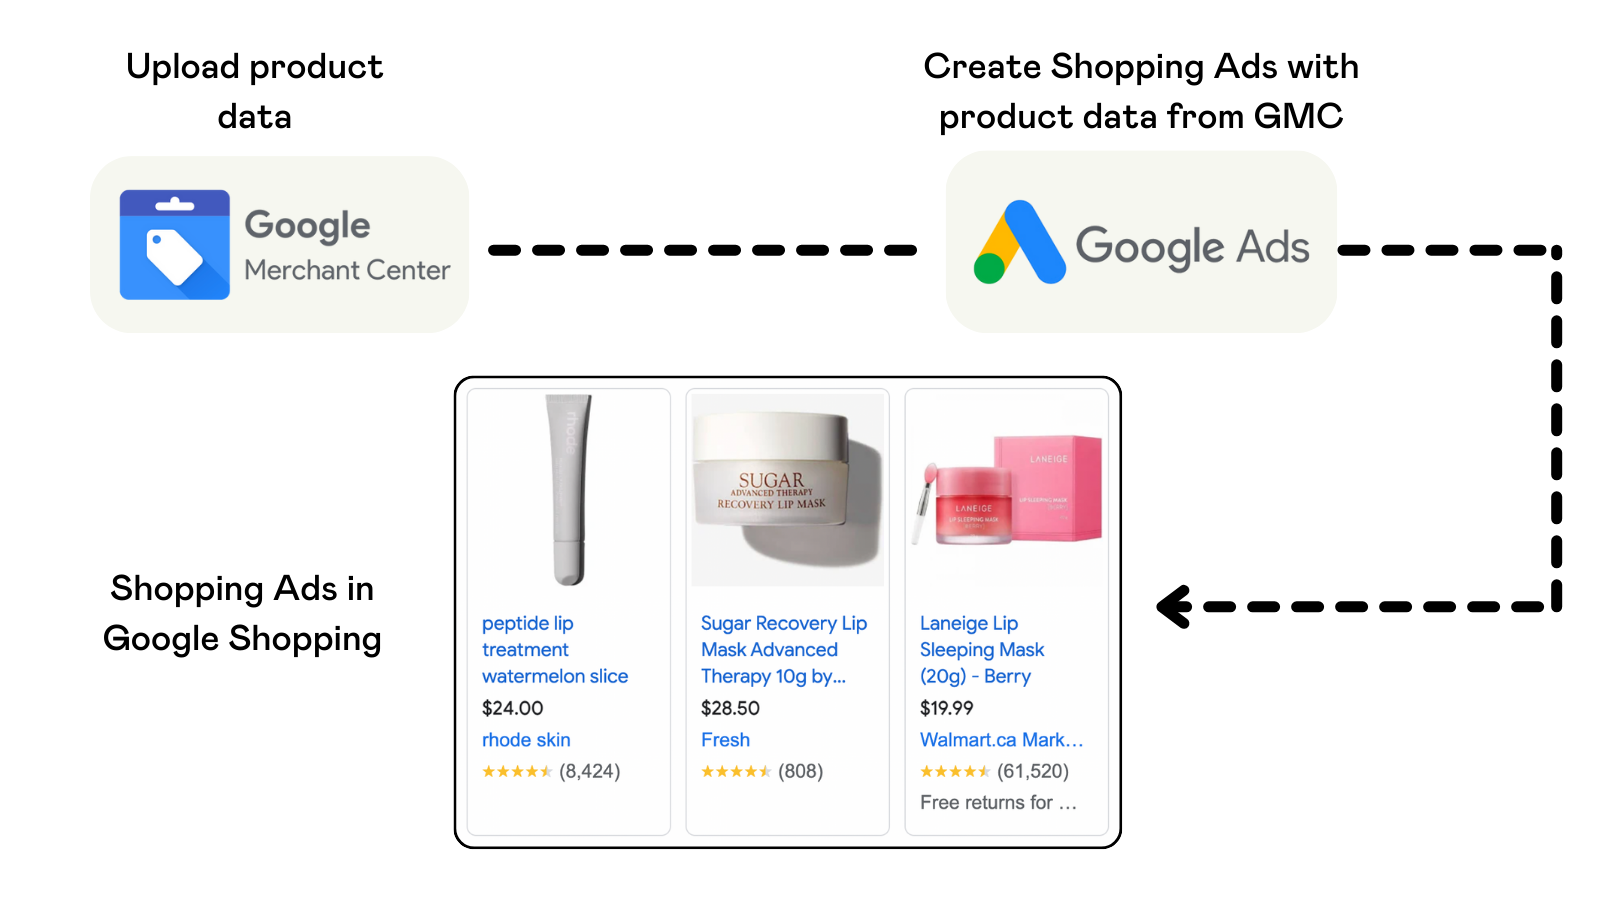 The process of how Shopping Ads are created